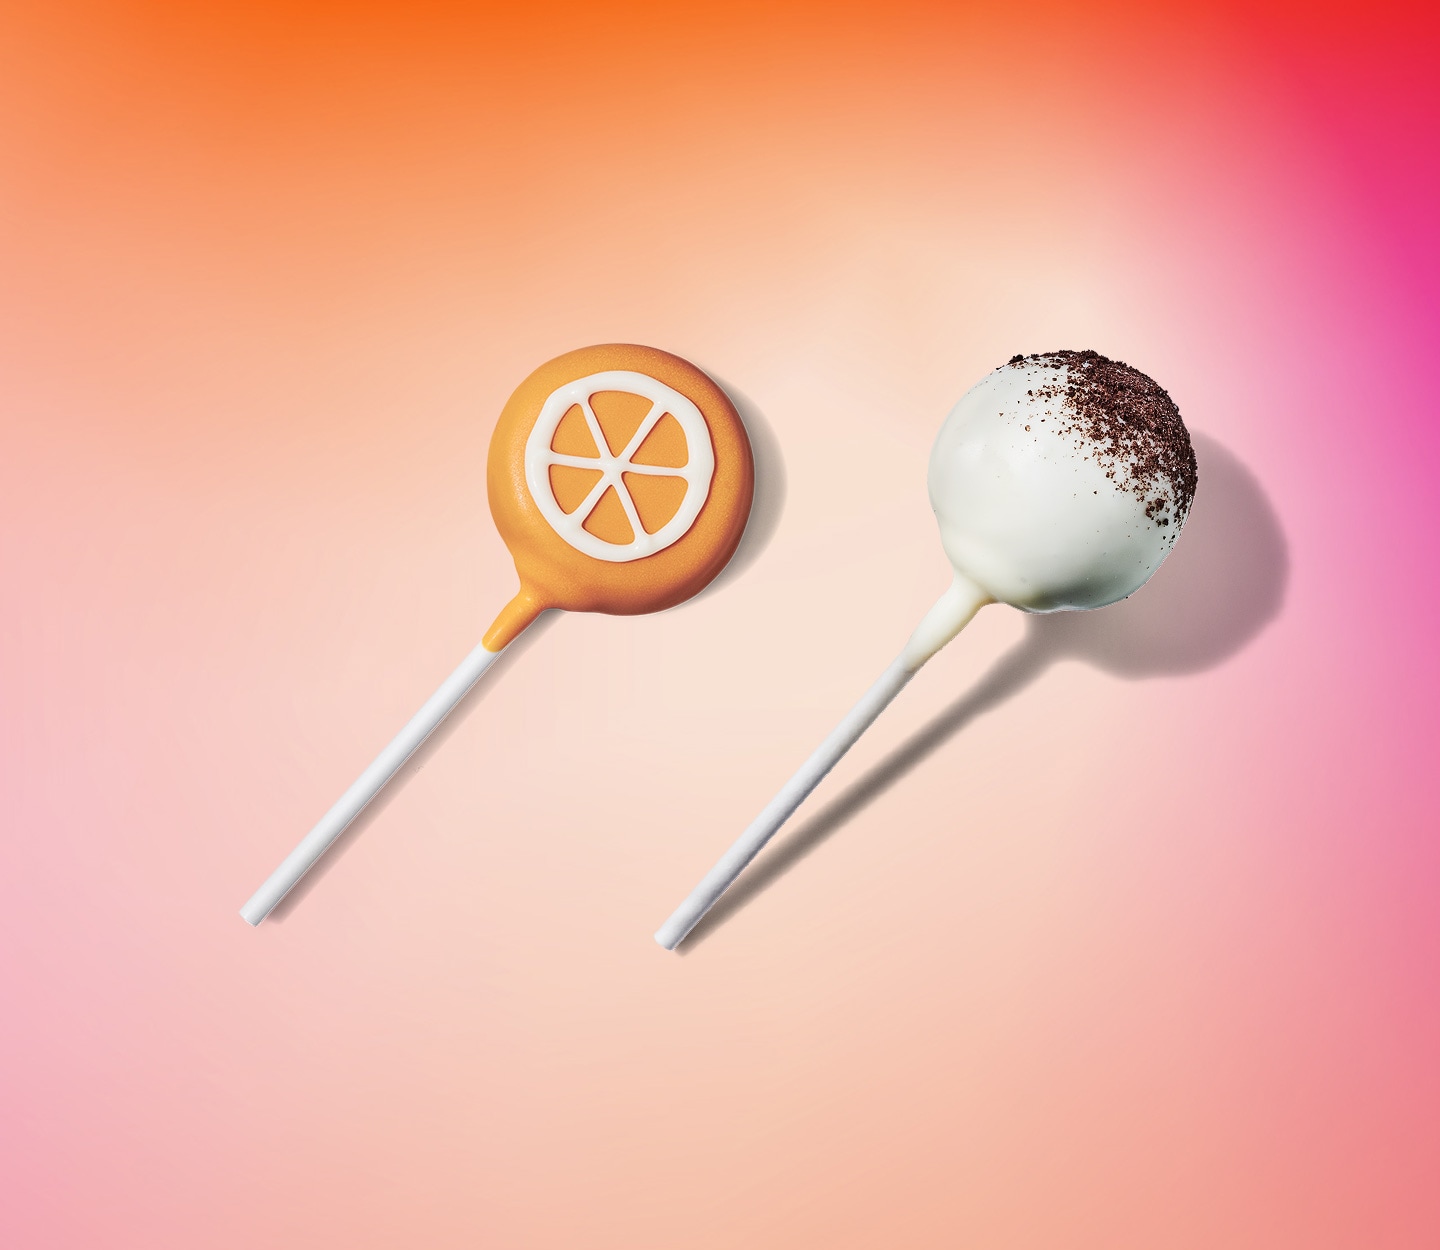 An orange cake pop with orange slices drawn in icing, a white cake pop with chocolate cookie crumbs.